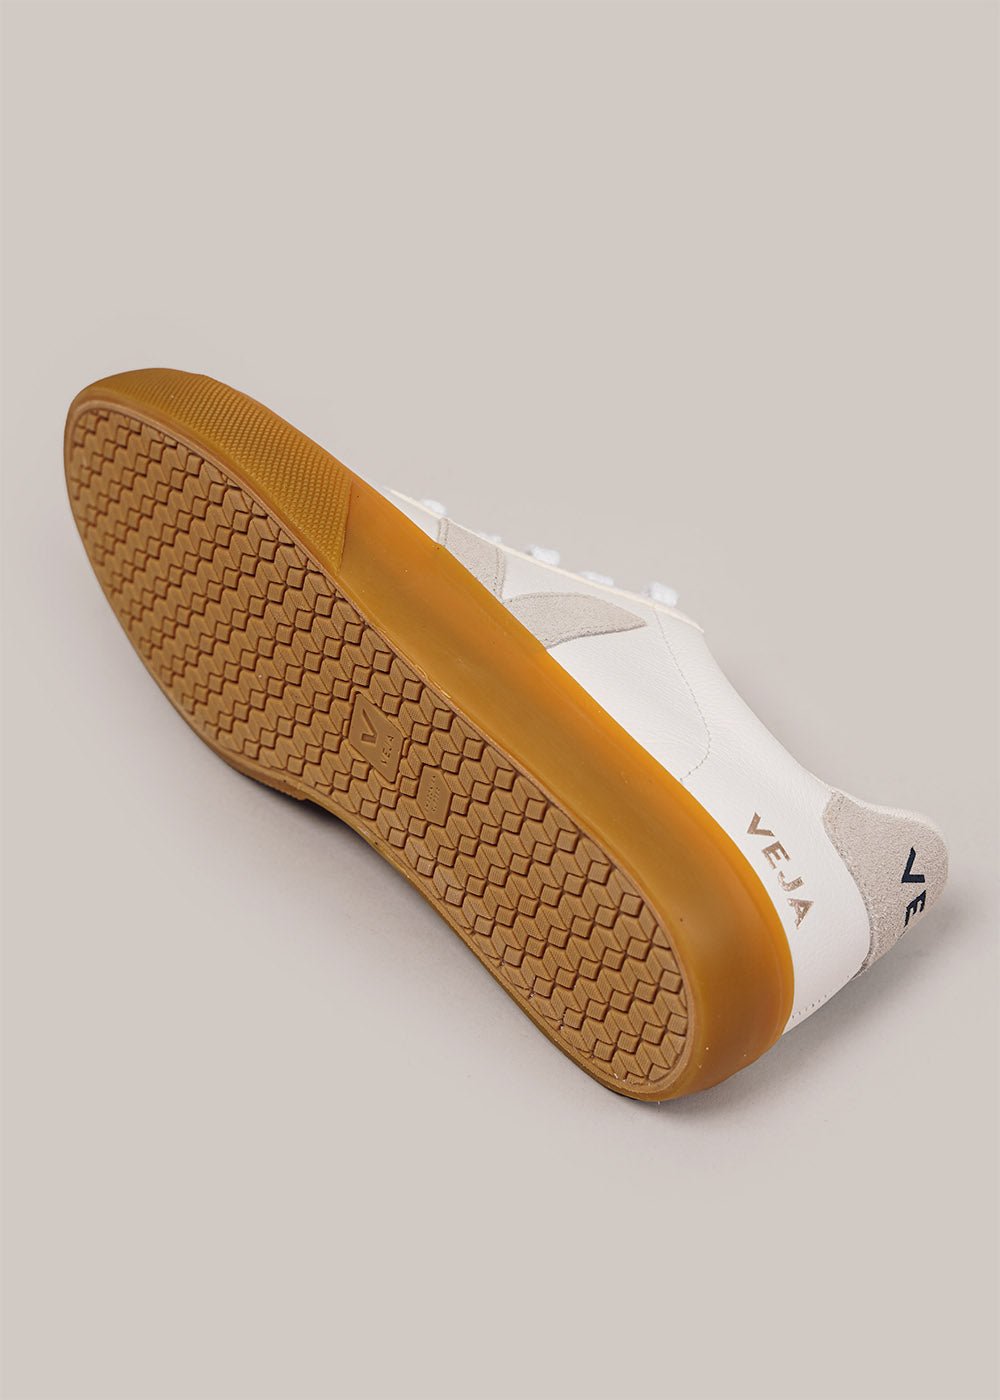 Veja Extra-White Natural Campo Sneakers - New Classics Studios Sustainable Ethical Fashion Canada